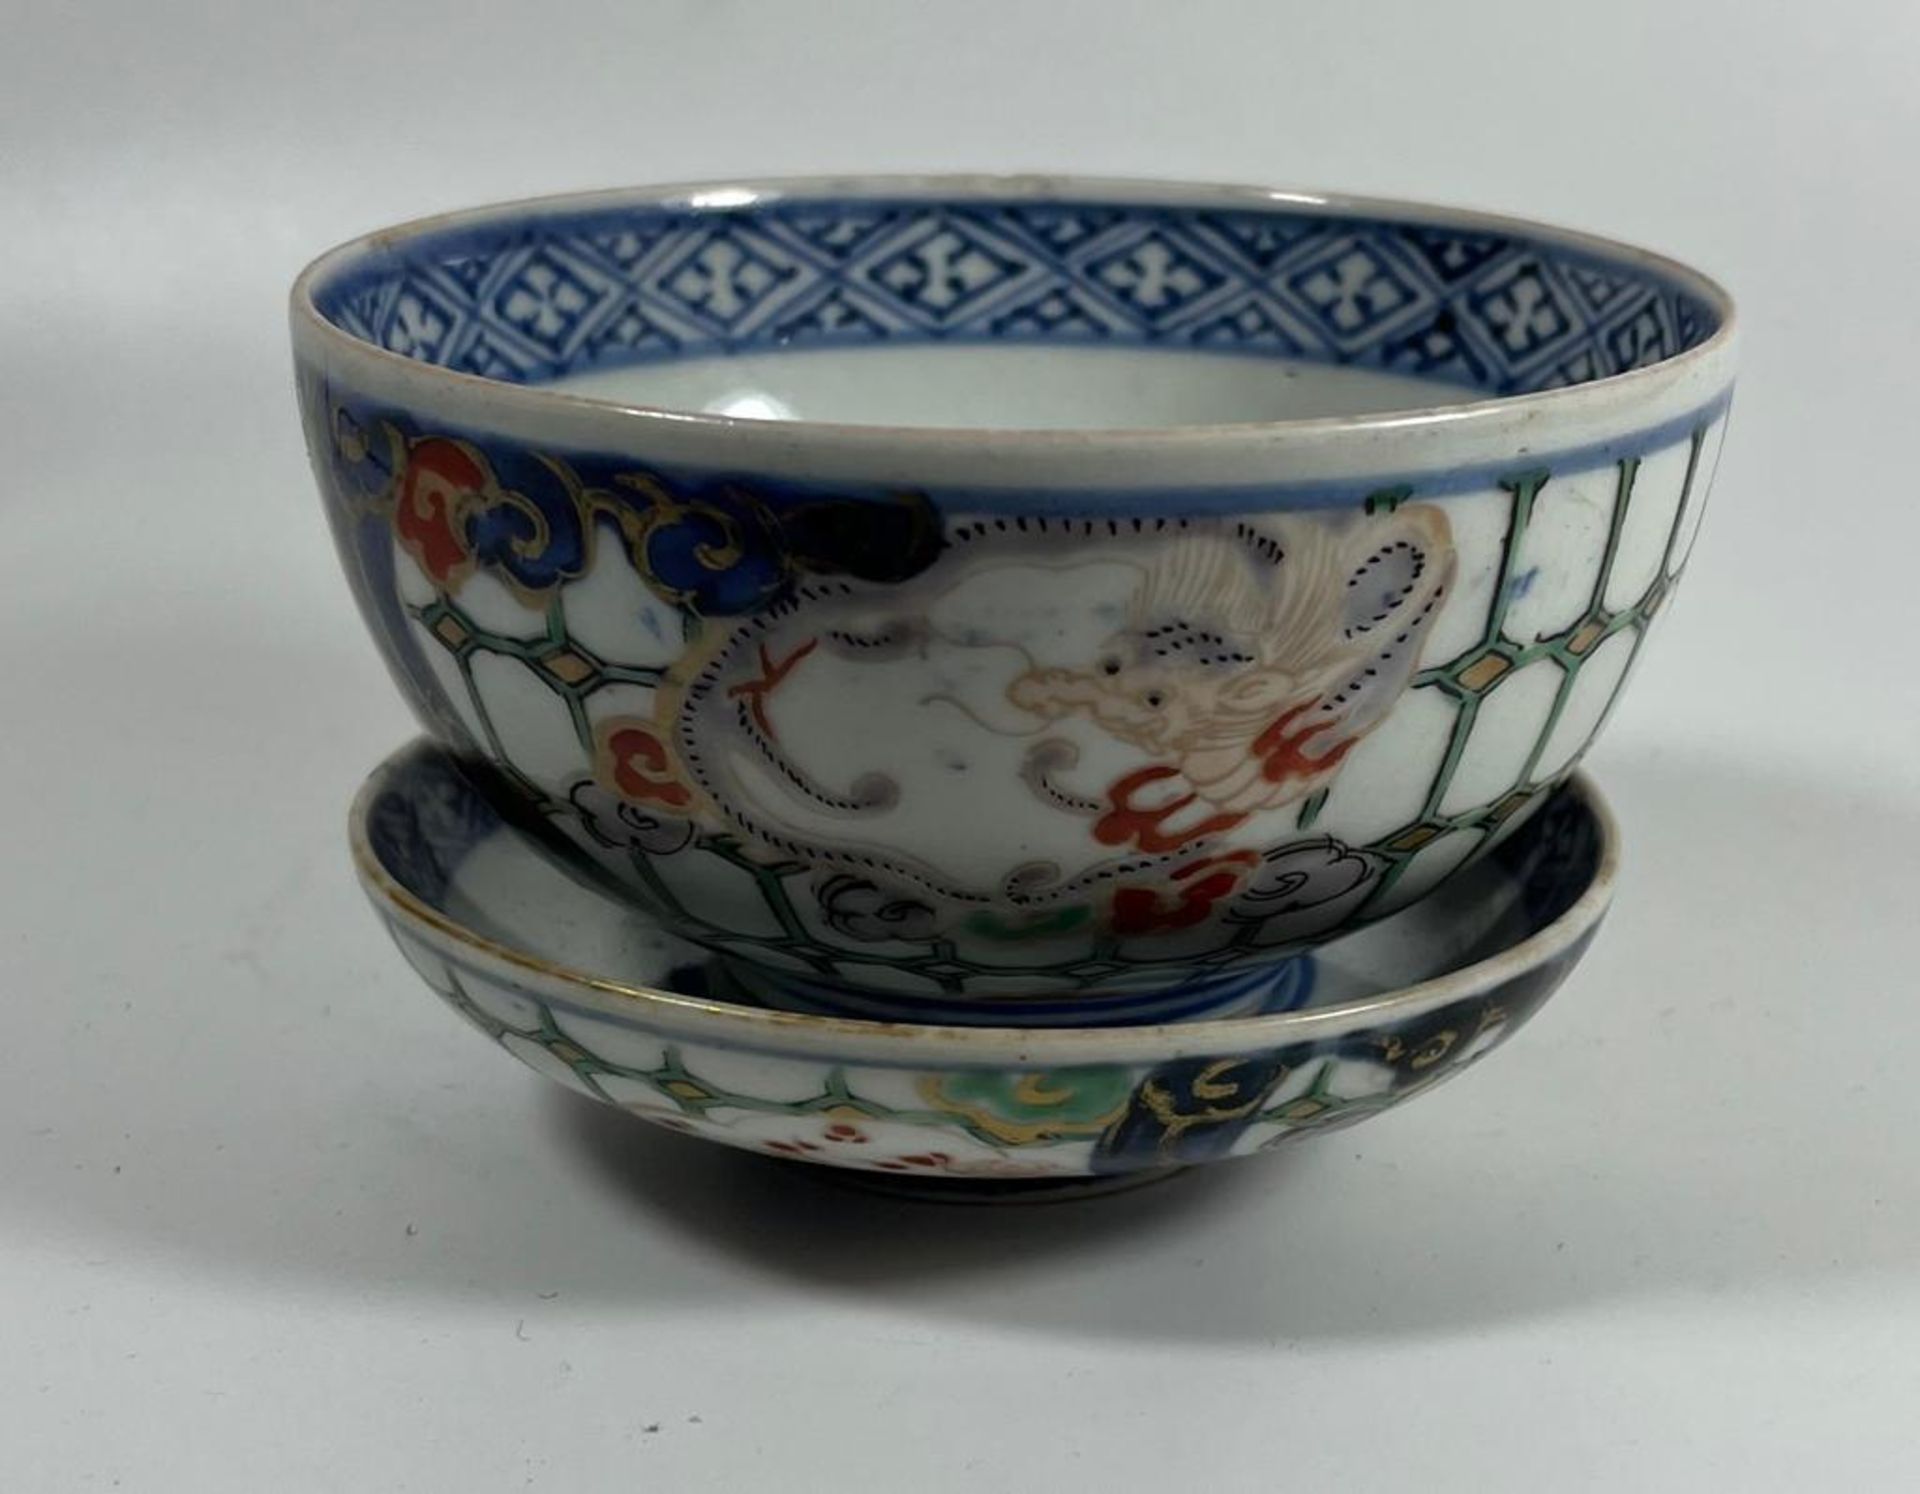 A 19TH CENTURY JAPANESE IMARI DRAGON BOWL AND MATCHING SAUCER, BOTH WITH MATCHING MOTIFS AND DESIGN,